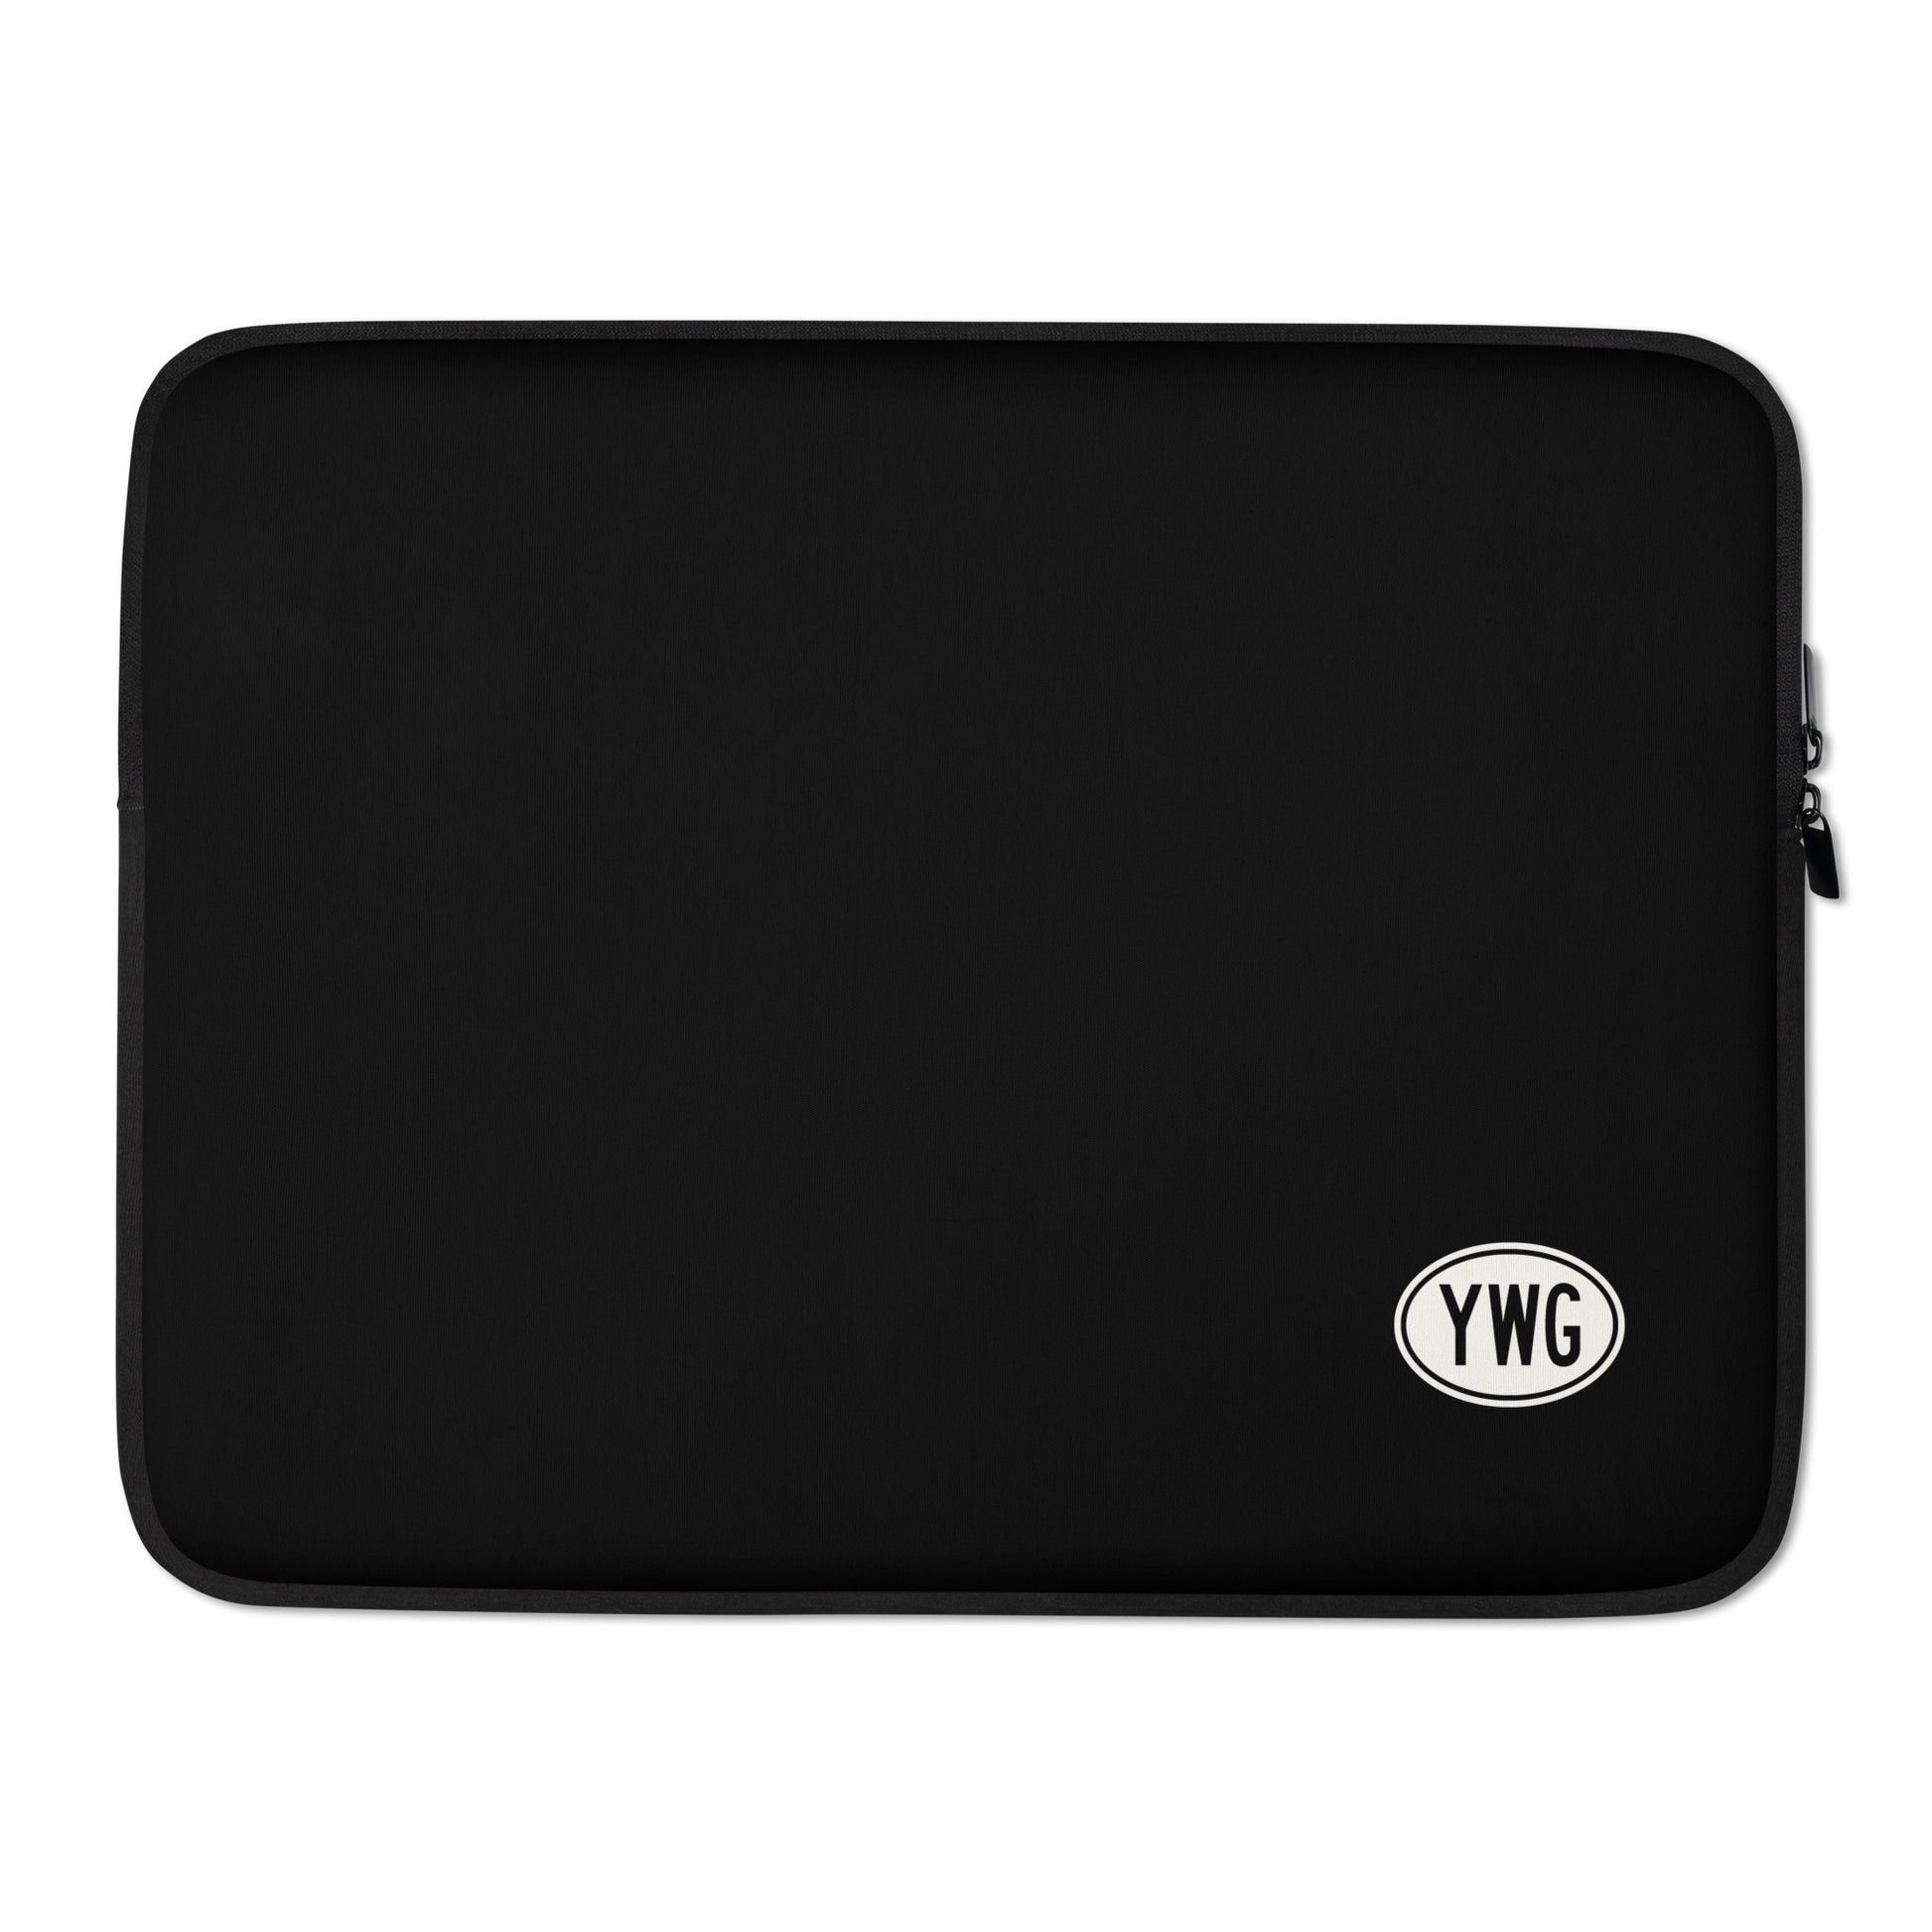 Unique Travel Gift Laptop Sleeve - White Oval • YWG Winnipeg • YHM Designs - Image 02